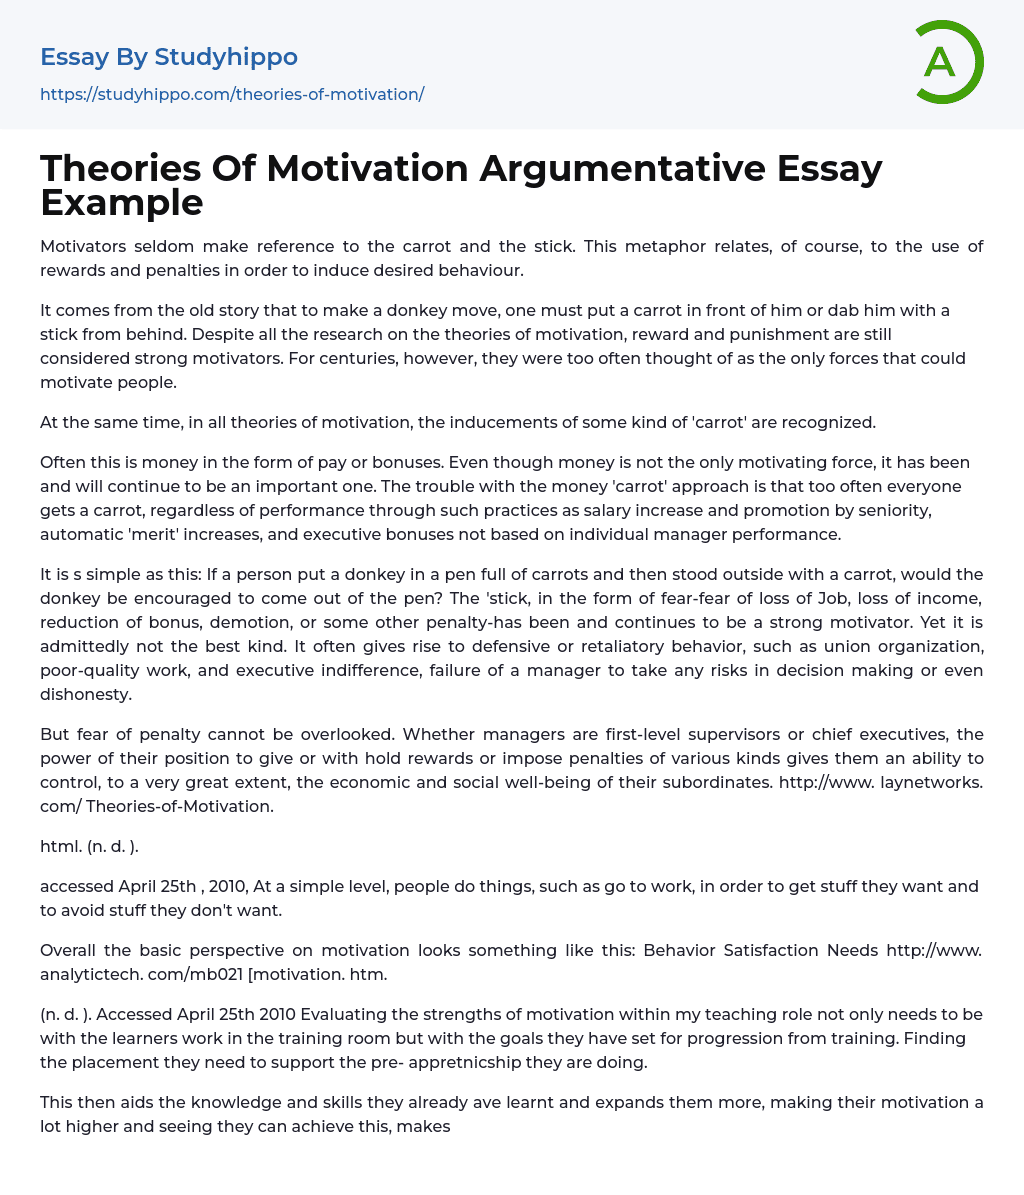 write an essay on theories of motivation